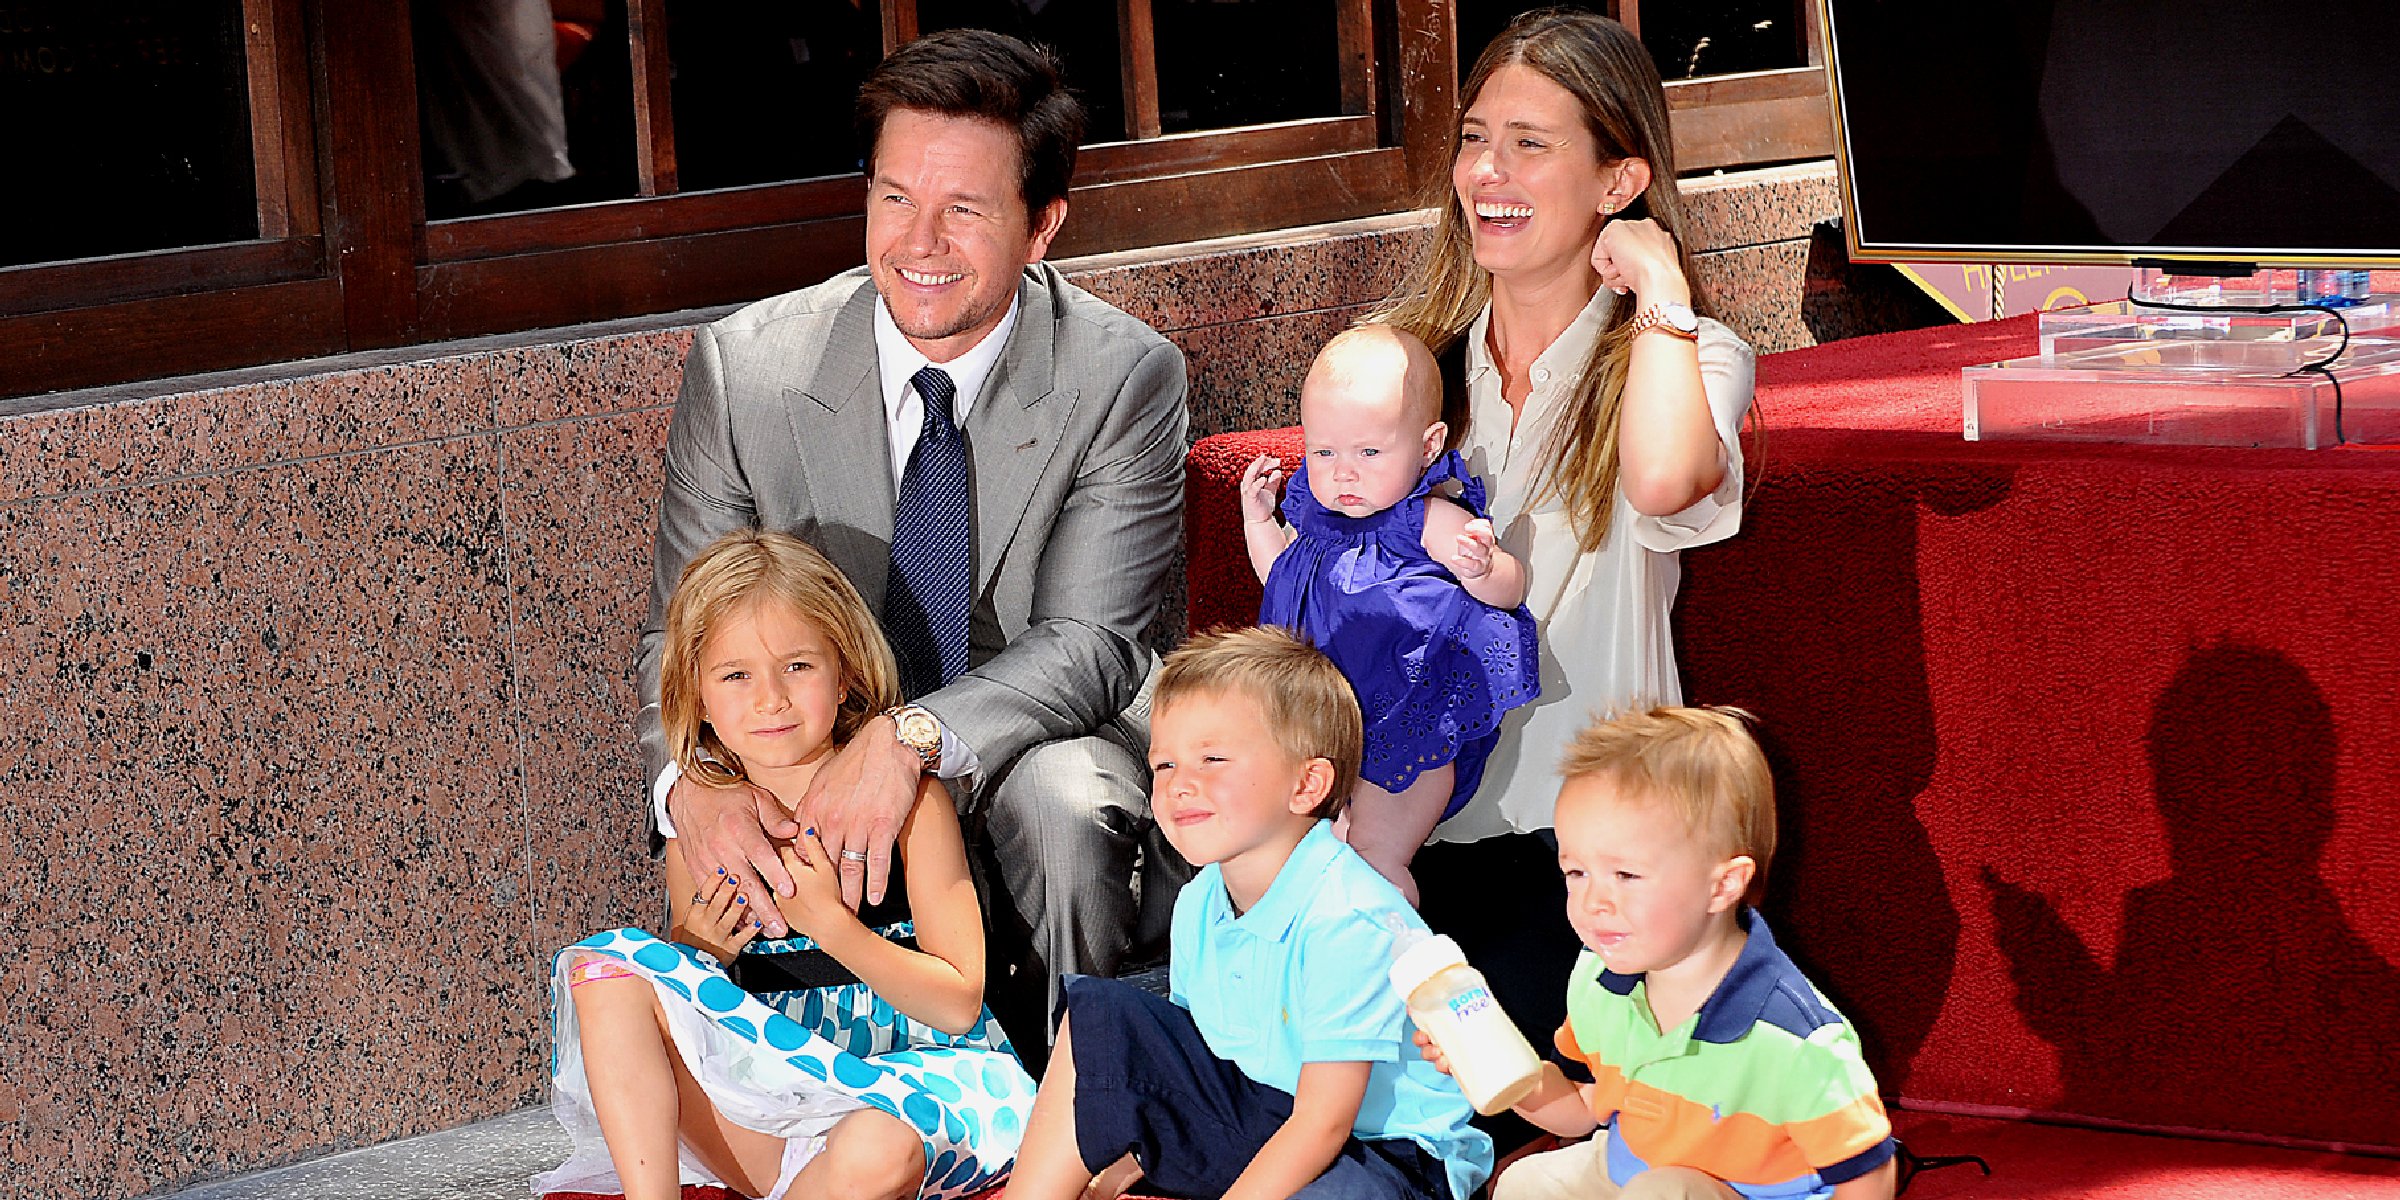 Mark Wahlberg with his wife Rhea Durham and their children Brendan, Grace, Ella, and Michael. | Source: Getty Images